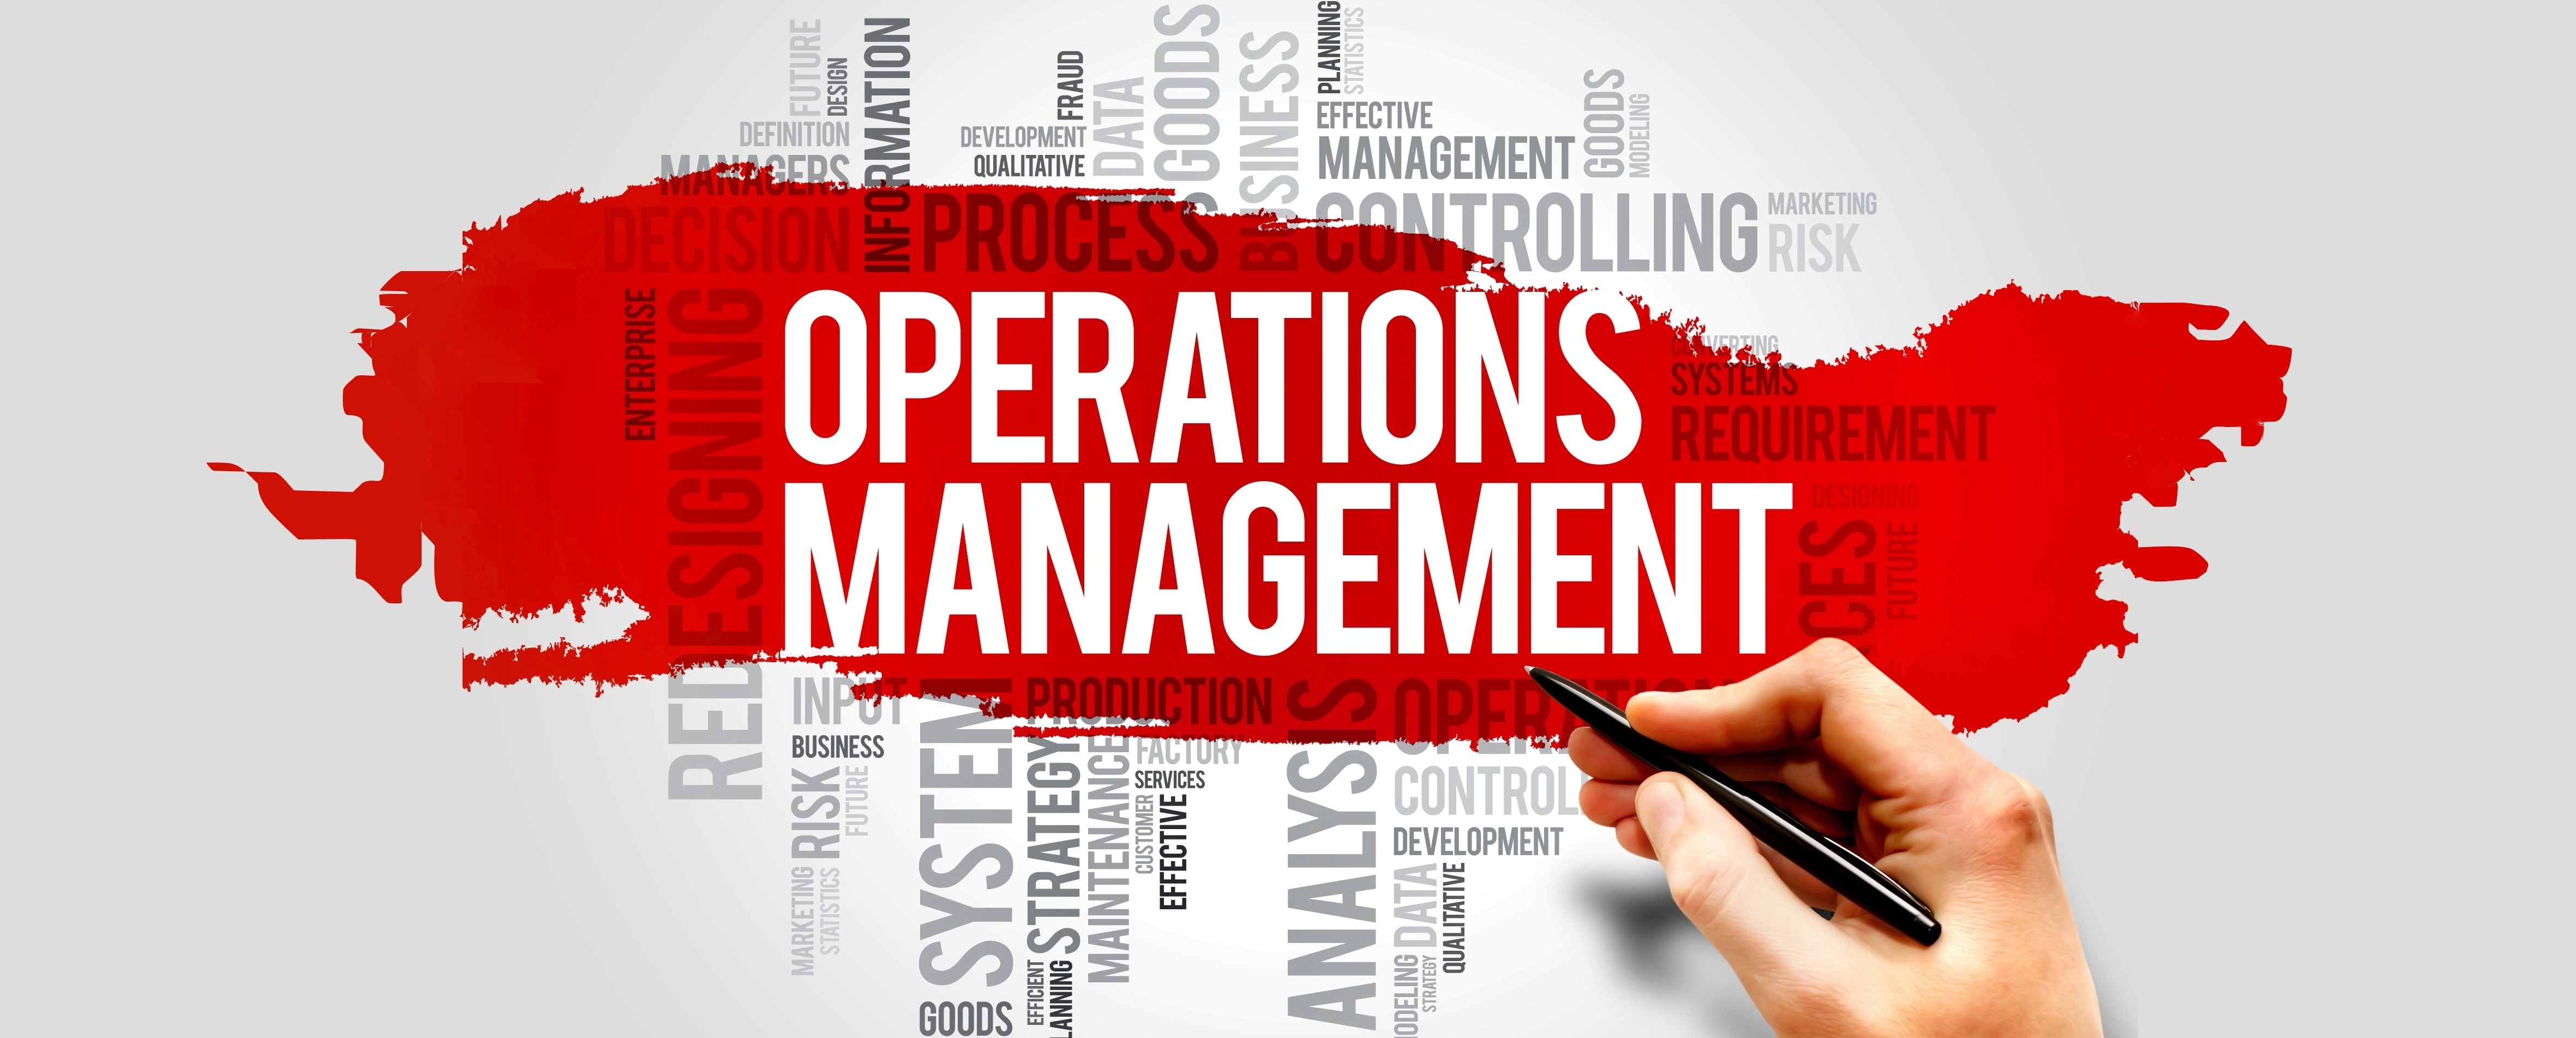 improve management of operations